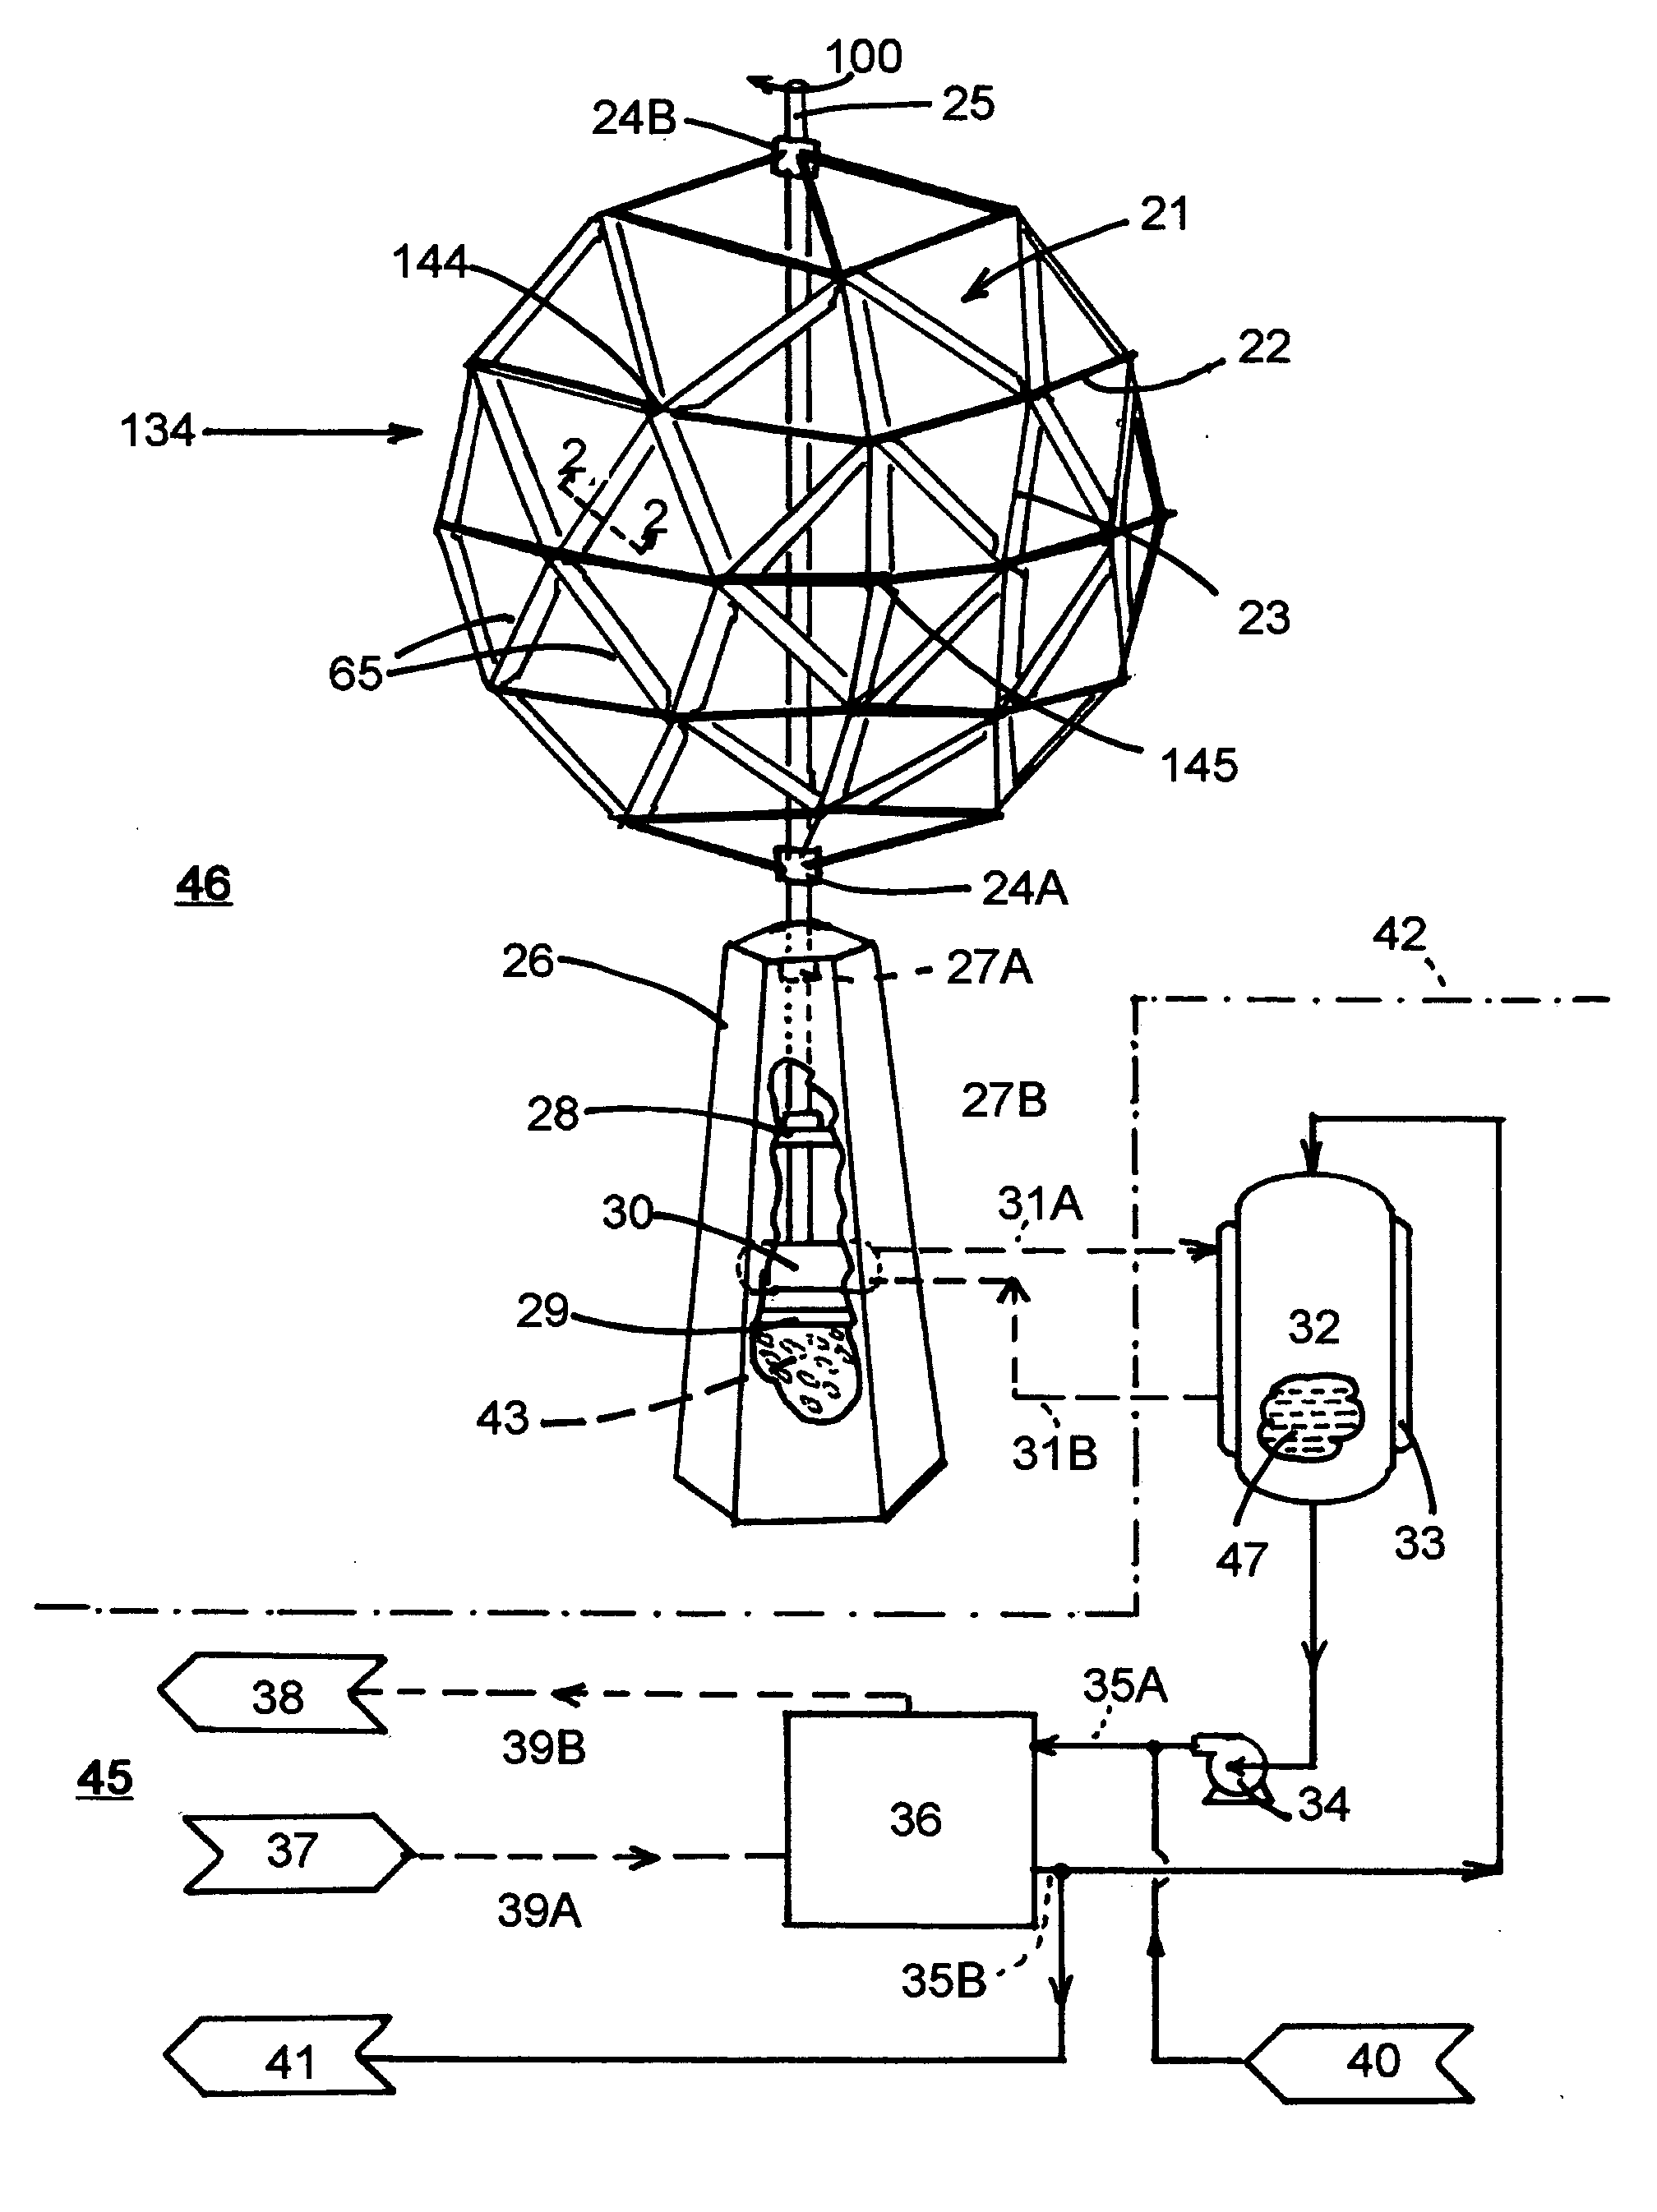 Wind turbine and energy distribution system